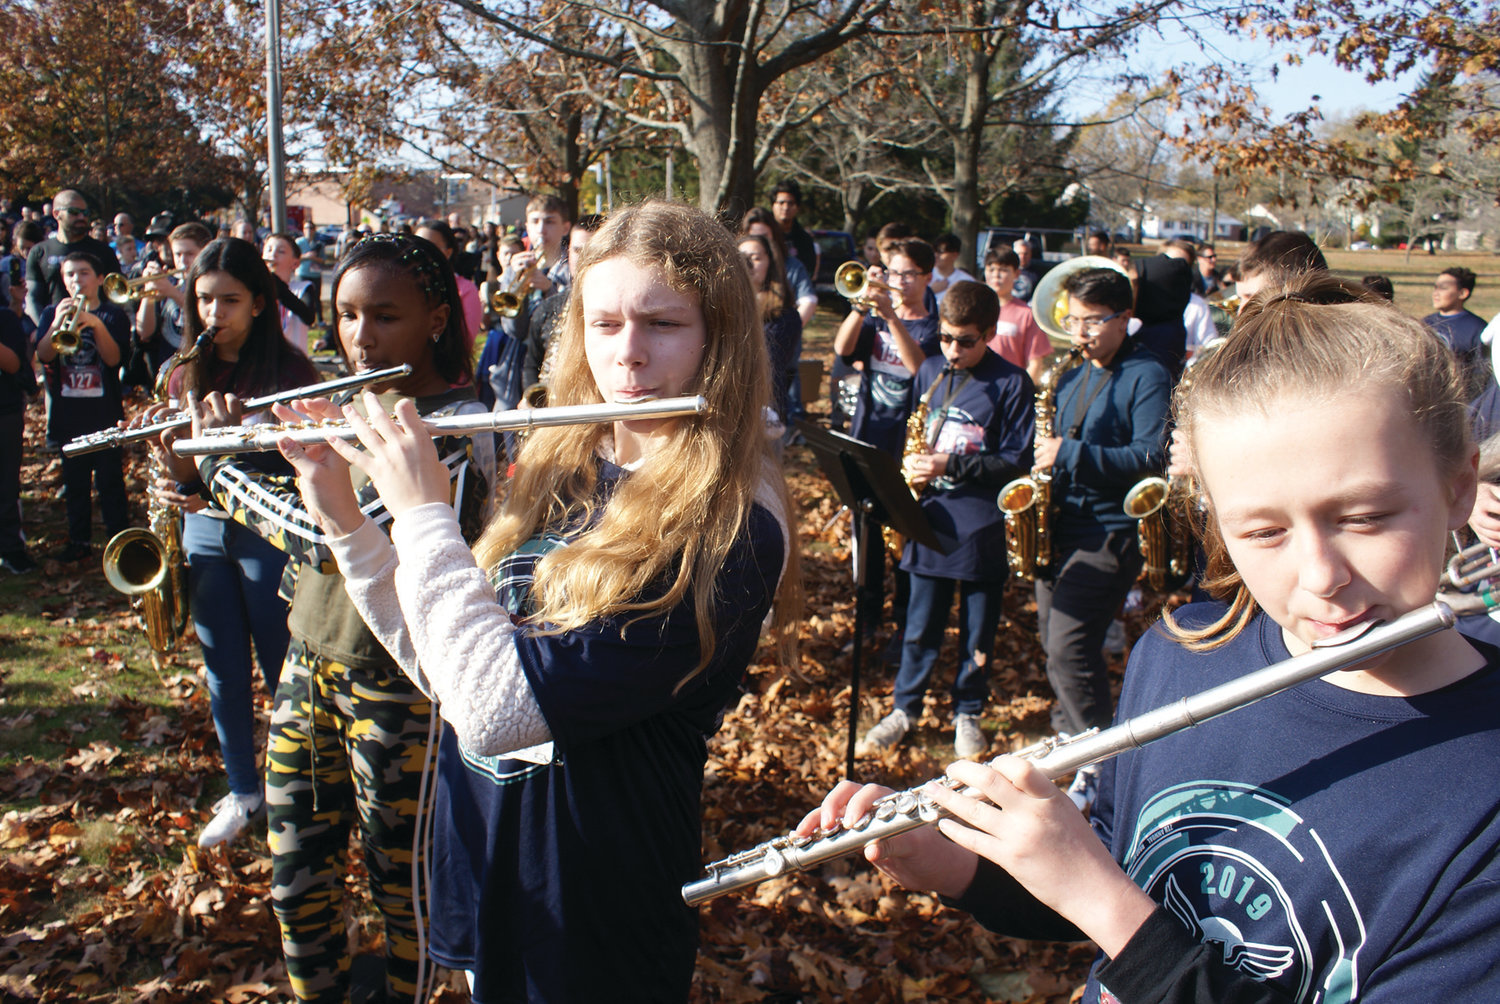 AND THE BAND PLAYED ON: The Park View Band performed the national anthem before the start of Monday’s 5K.